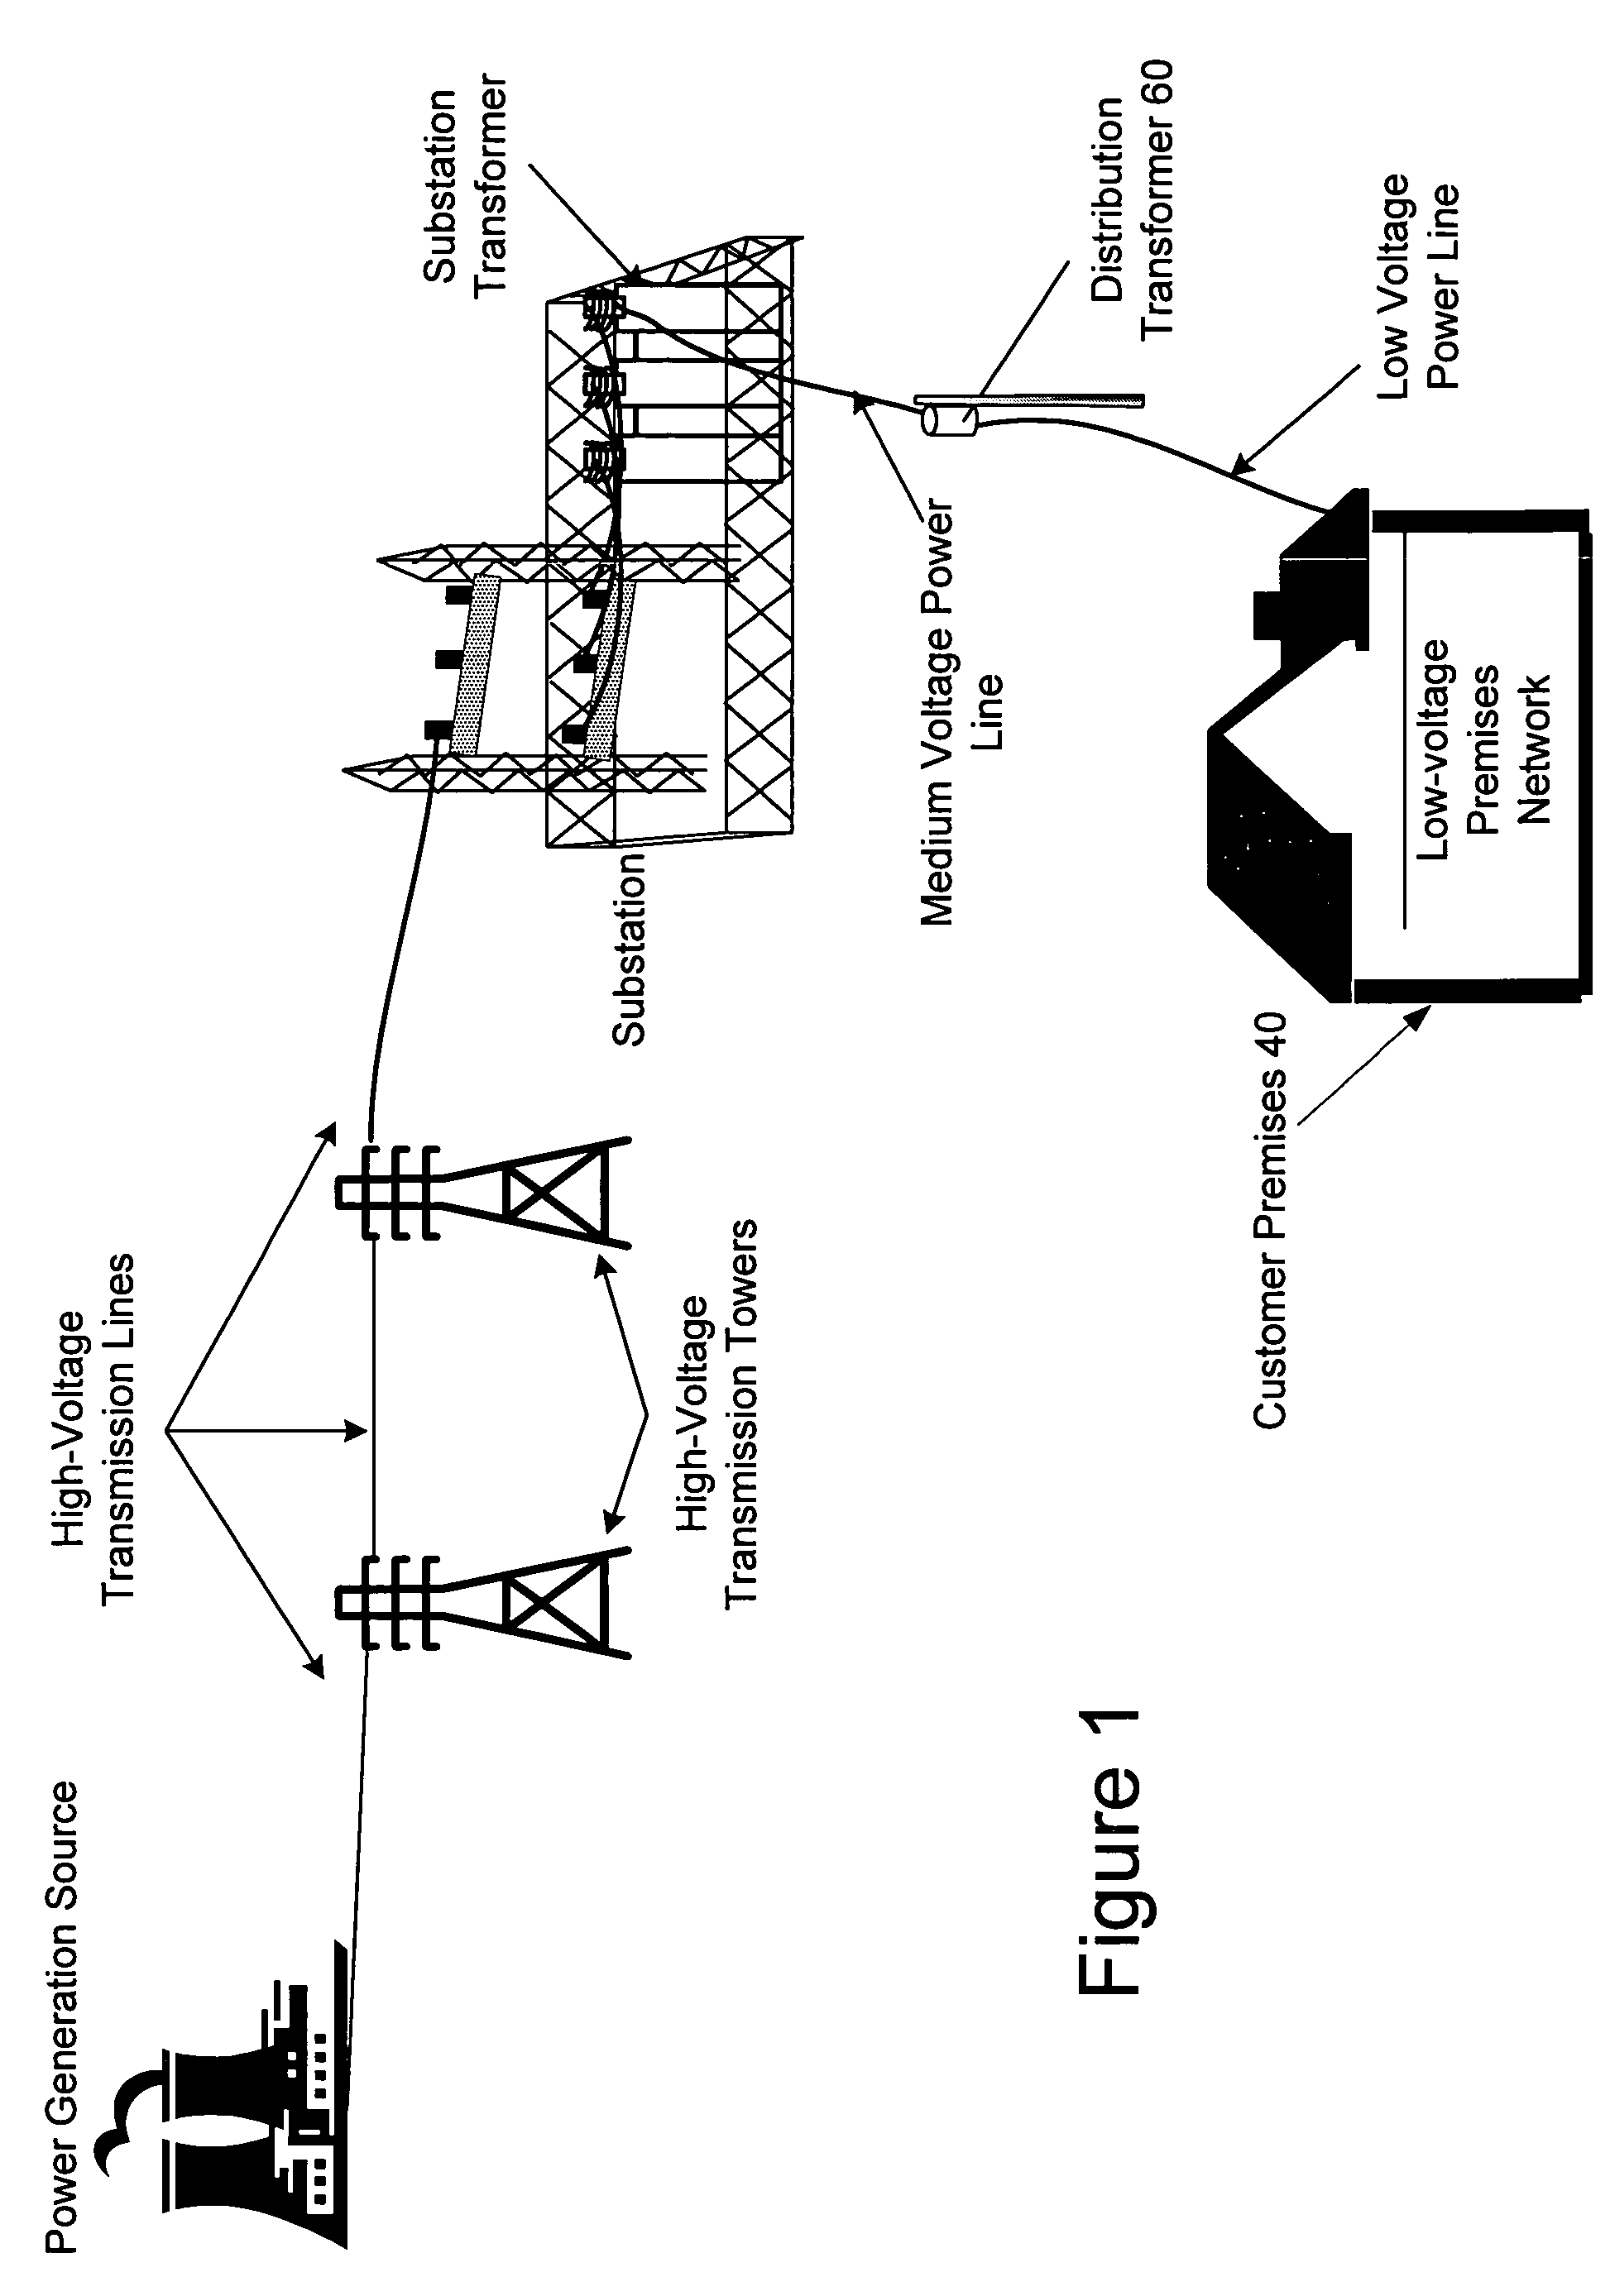 Power line repeater system and method